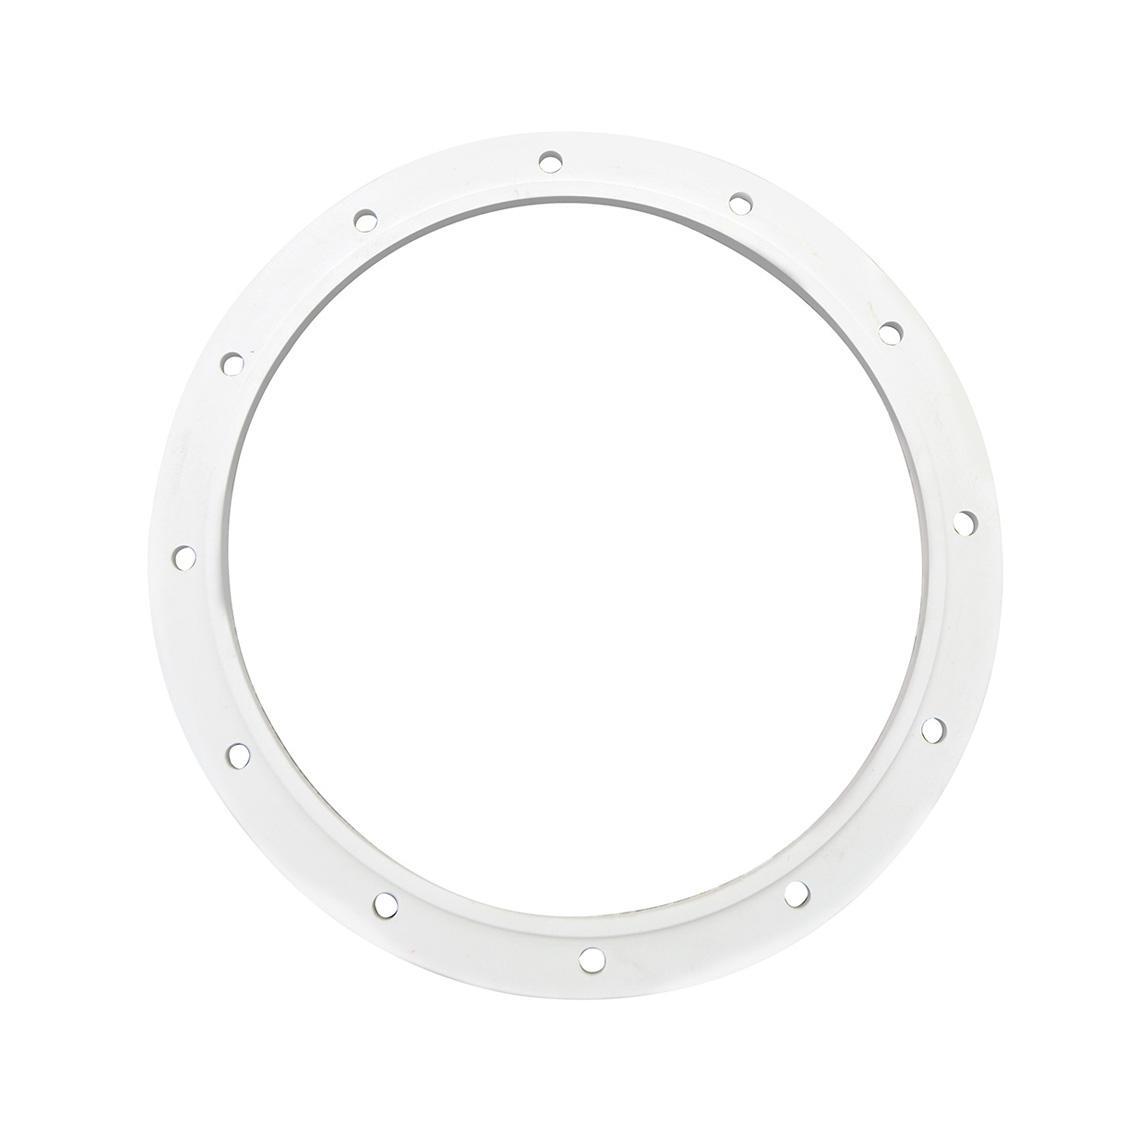 Davey Ecopure / Onga LSF / Emaux  Flange Gasket to suit  50mm bolt down M.P.Valve